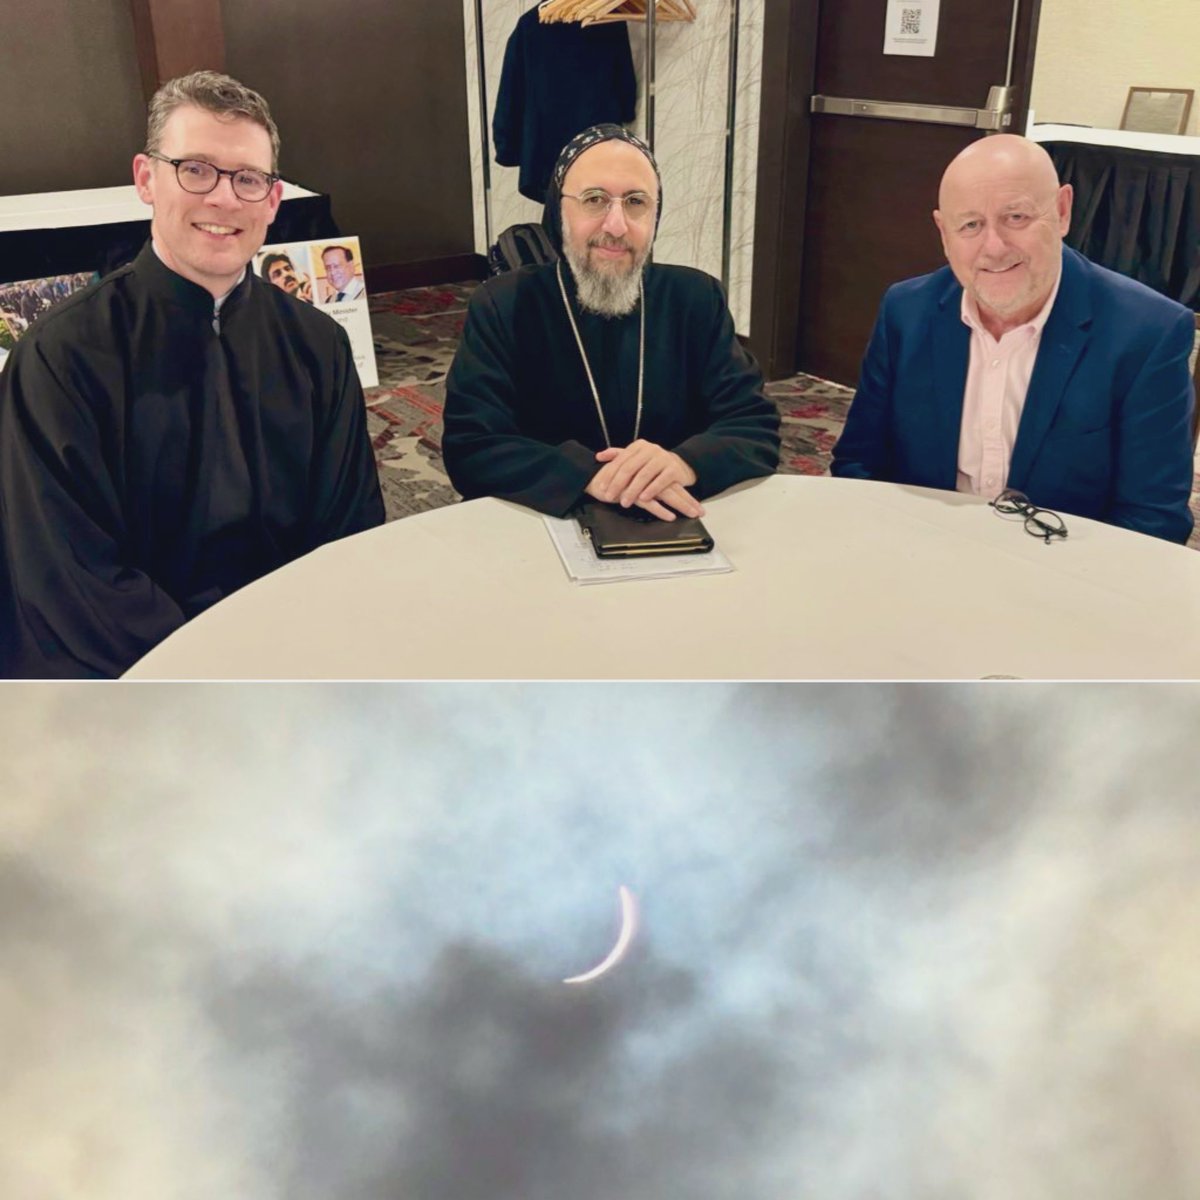 Very good to be with my dear friends Fr Deacon Andrew Bennett and @MervThomas at the @RLPartnership Consultation. Walking between sessions, managed to also catch a brief glimpse of today’s #Eclipse.